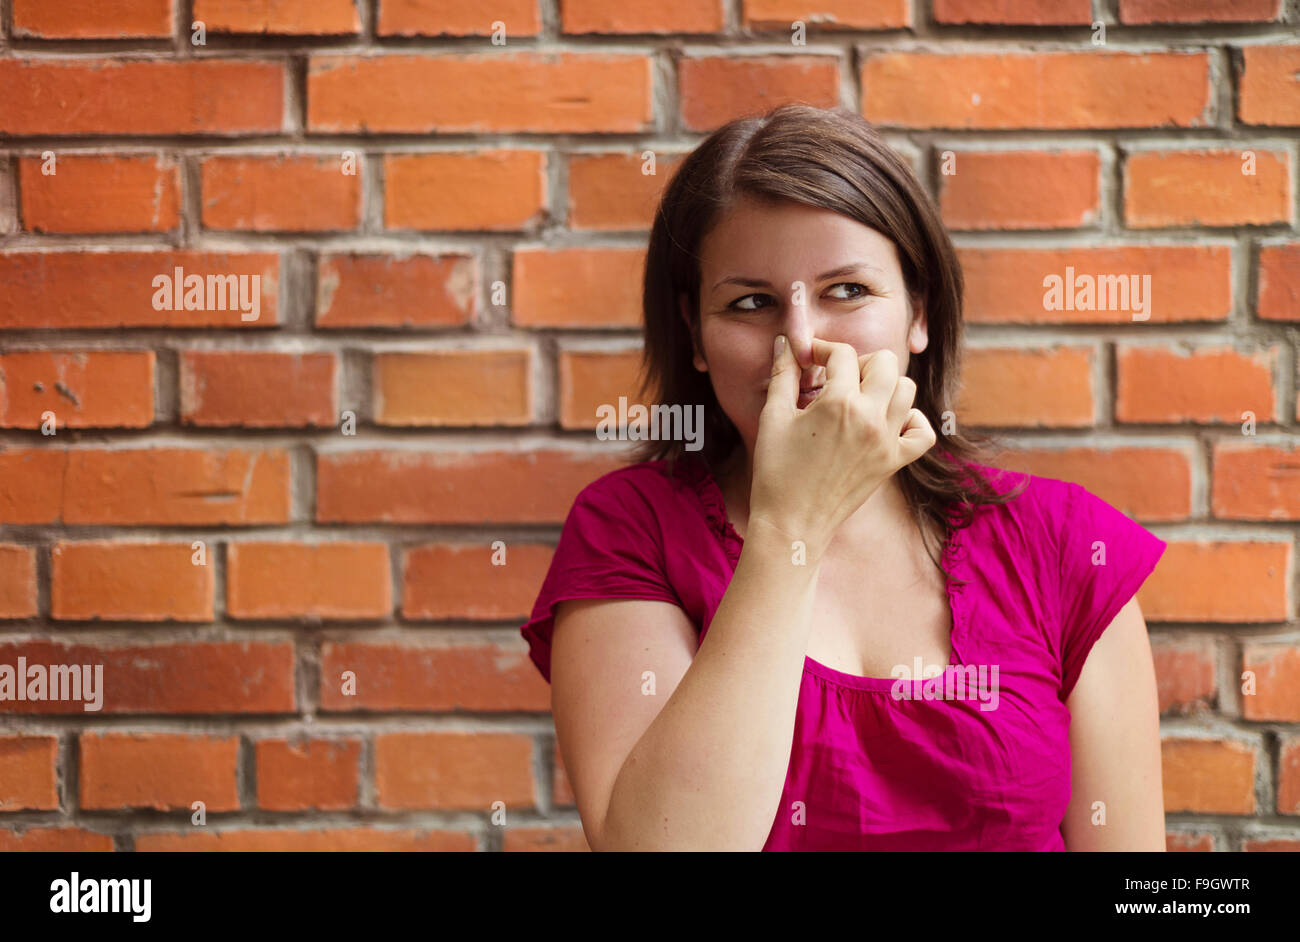 Beautiful young woman making funny faces on a brick wall background Stock Photo